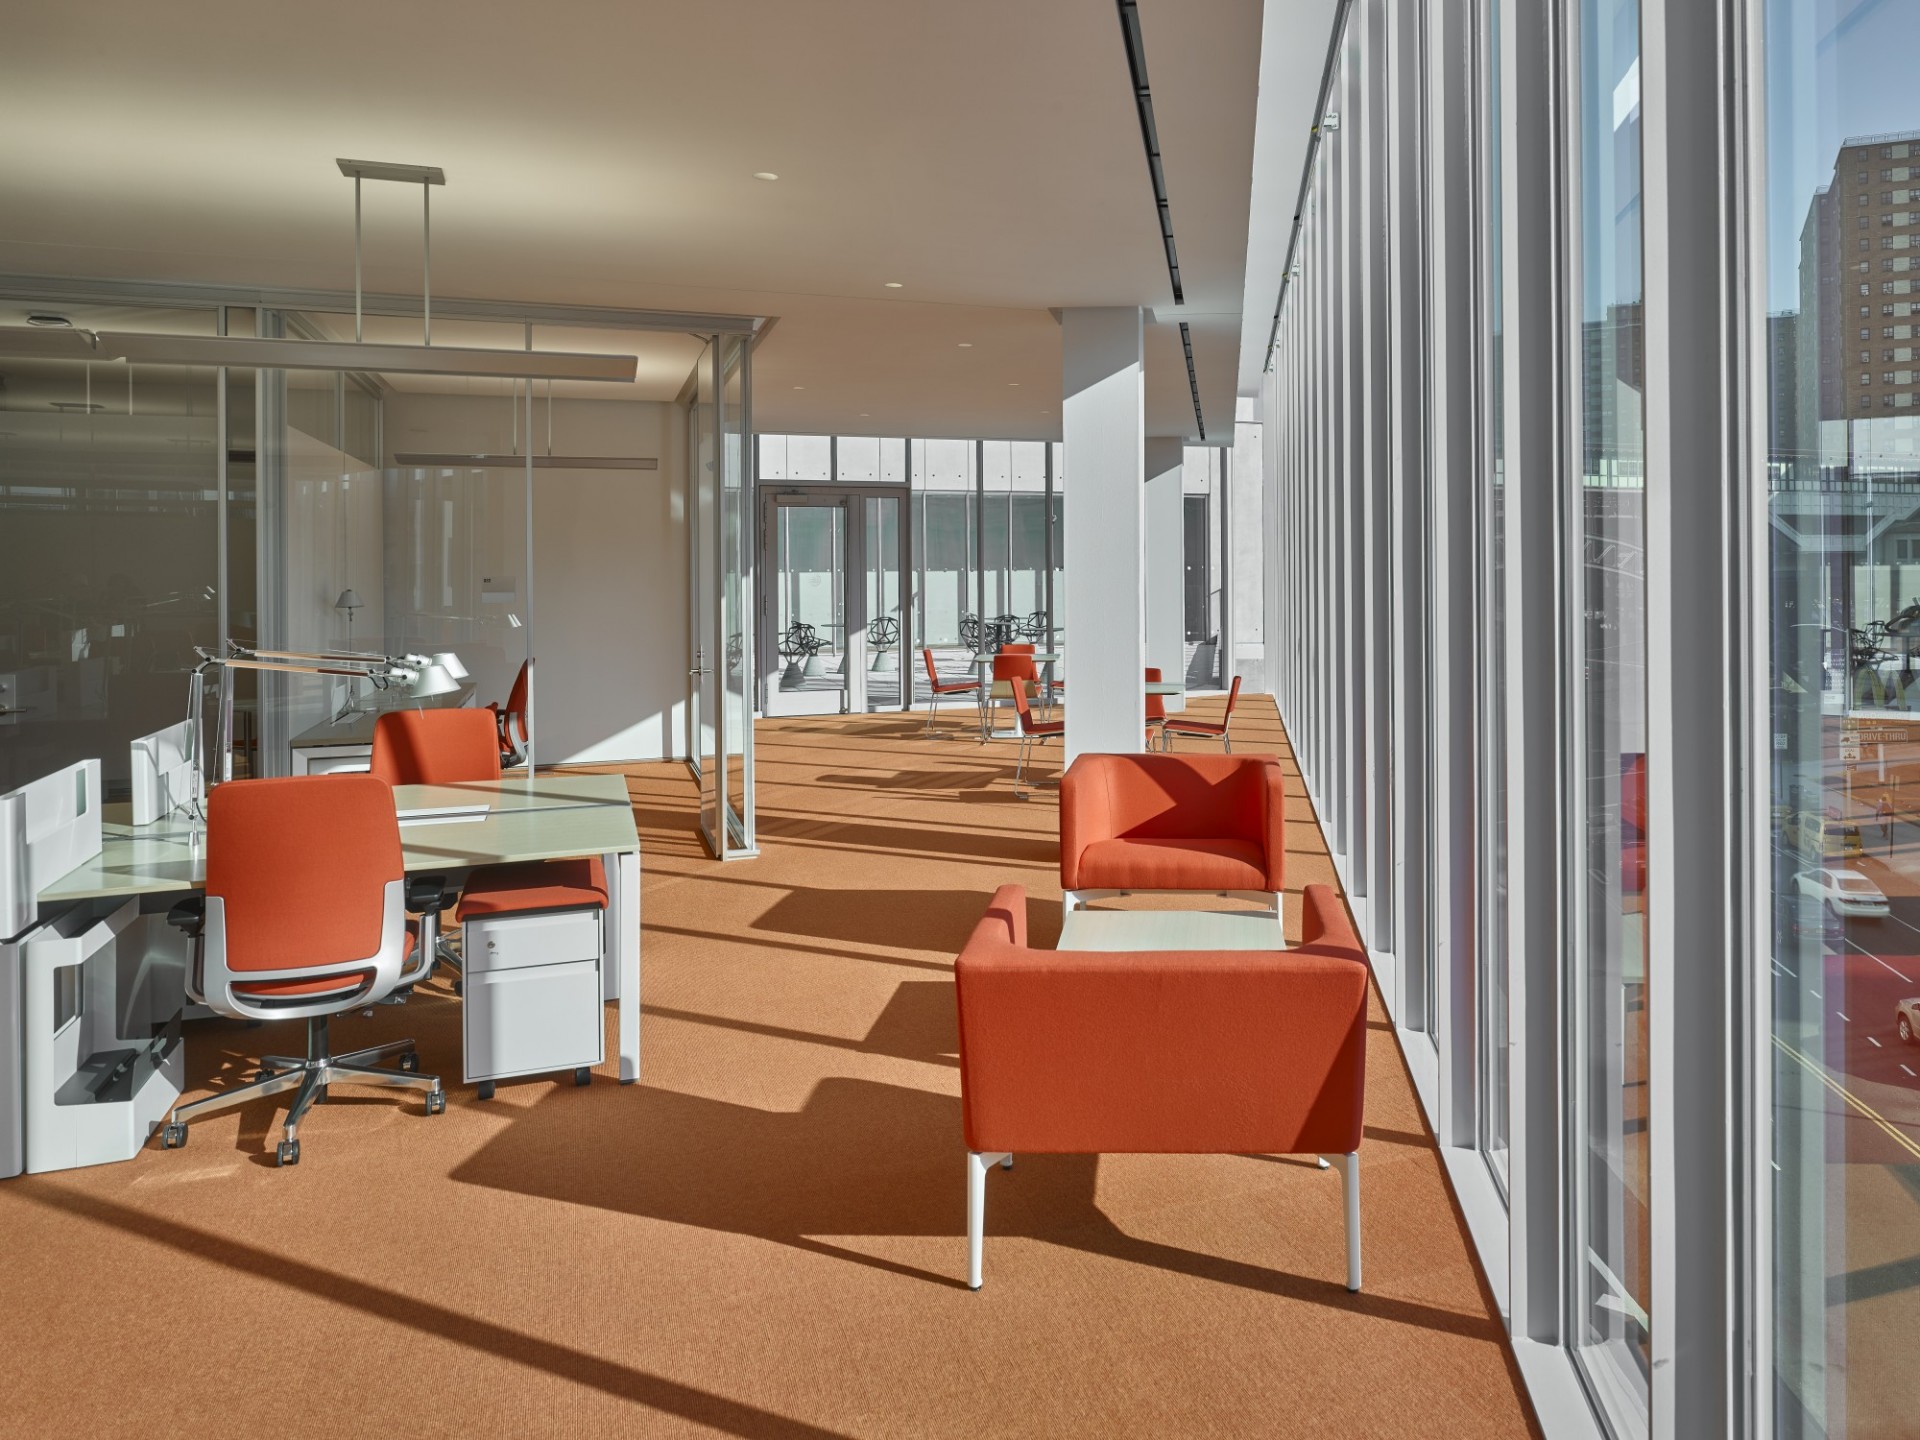 An open work space with desks, tables and lounge chairs.